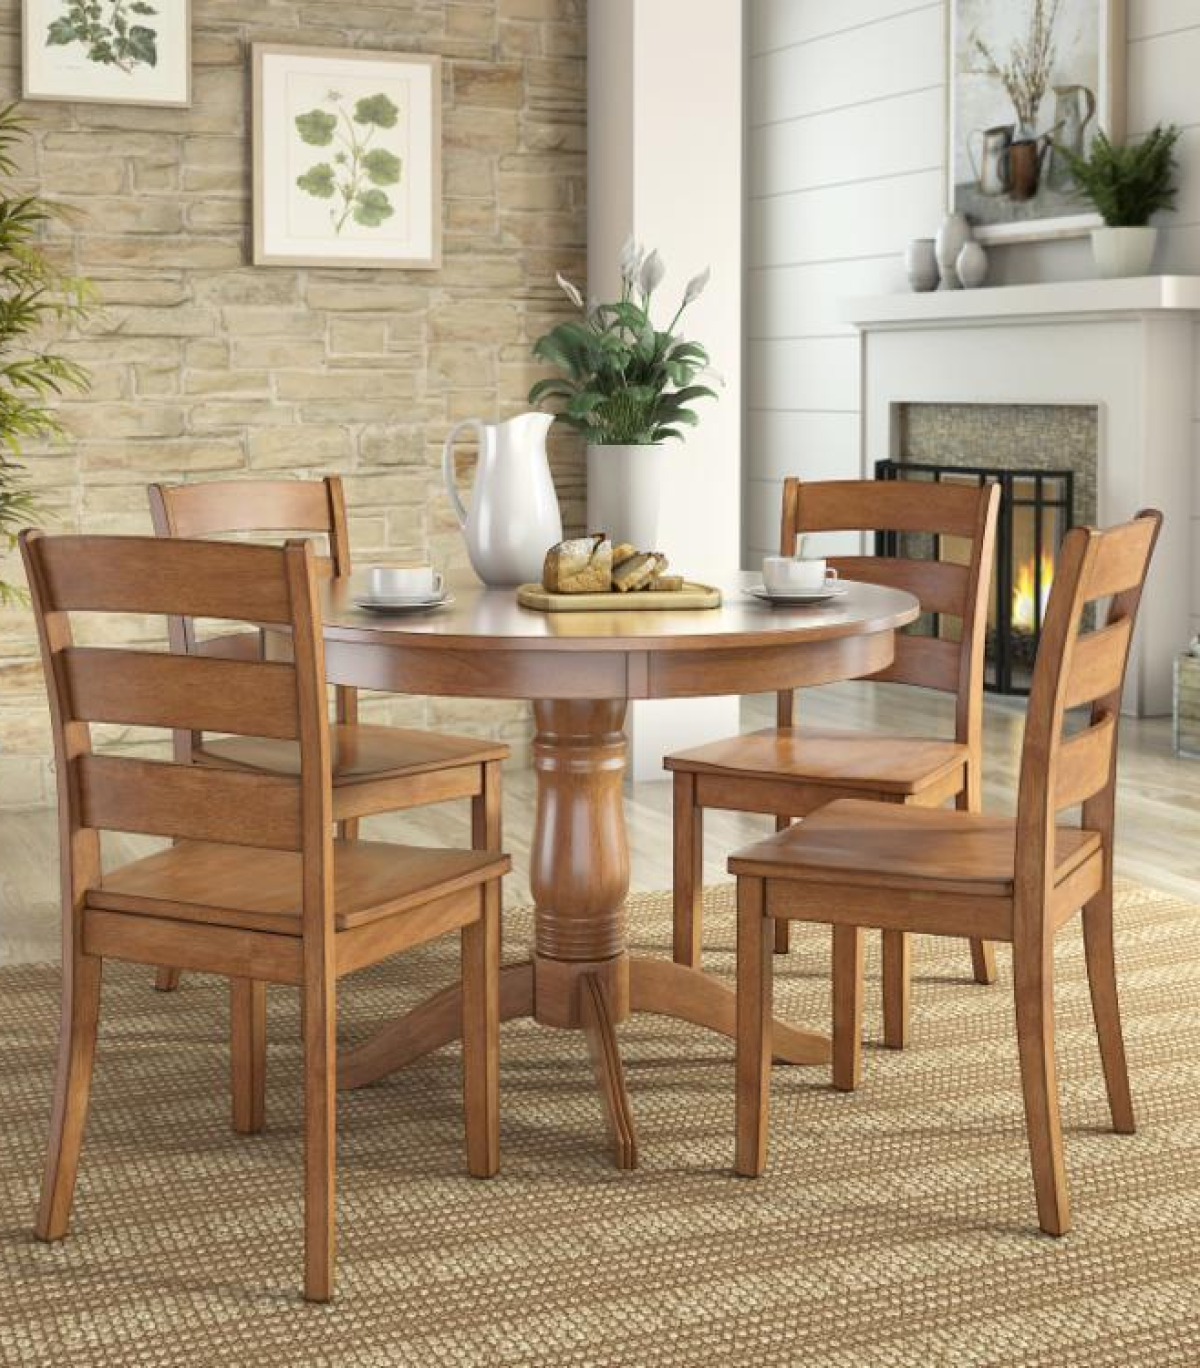 Standard 4 + 1 Dining Table Sets